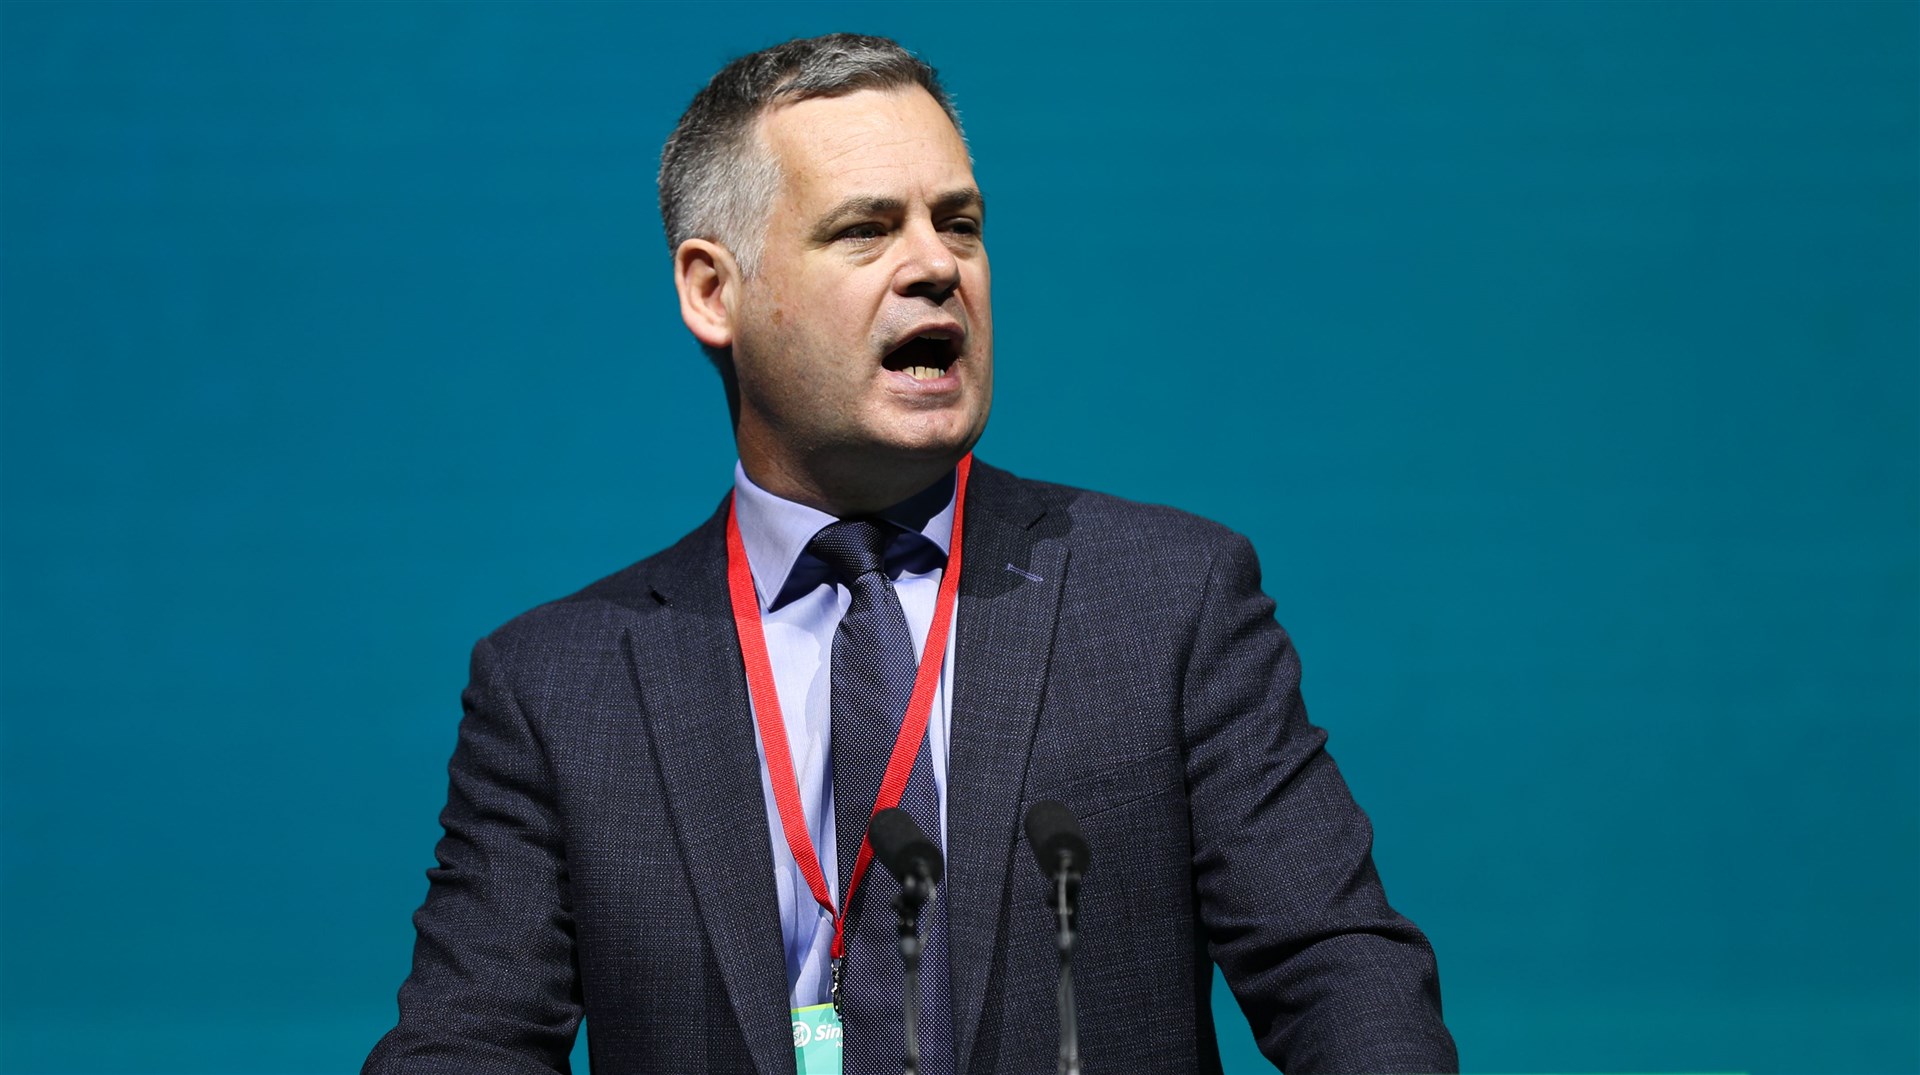 Sinn Fein TD Pearse Doherty said the truth for RTE should be ‘non-negotiable’ (Damien Storan/PA)